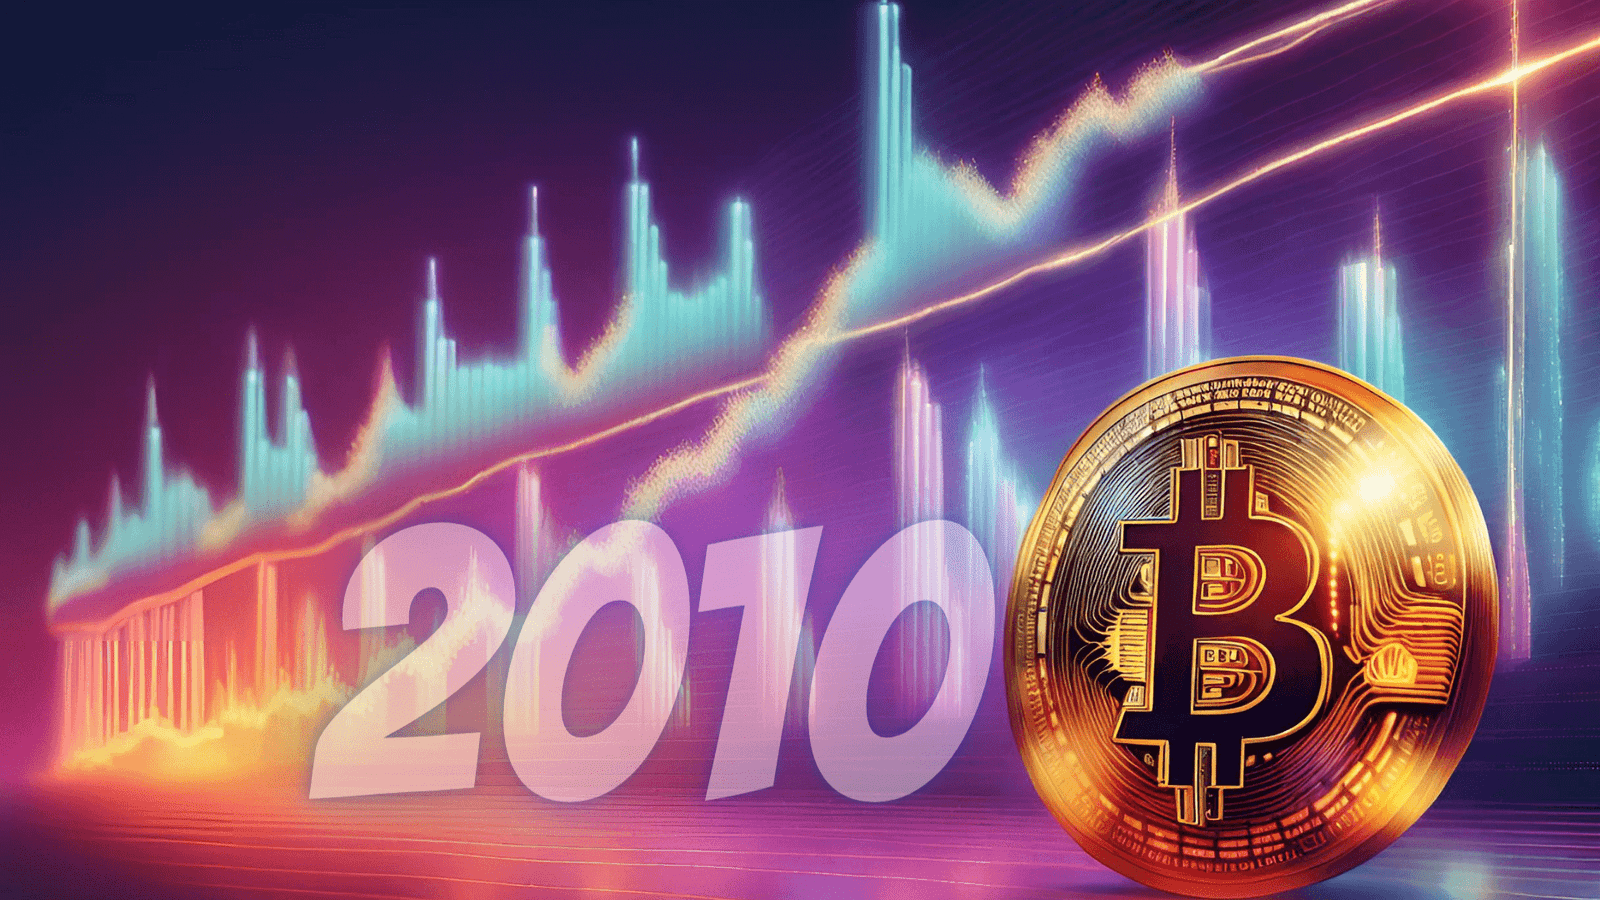 Price of Bitcoin in 2010